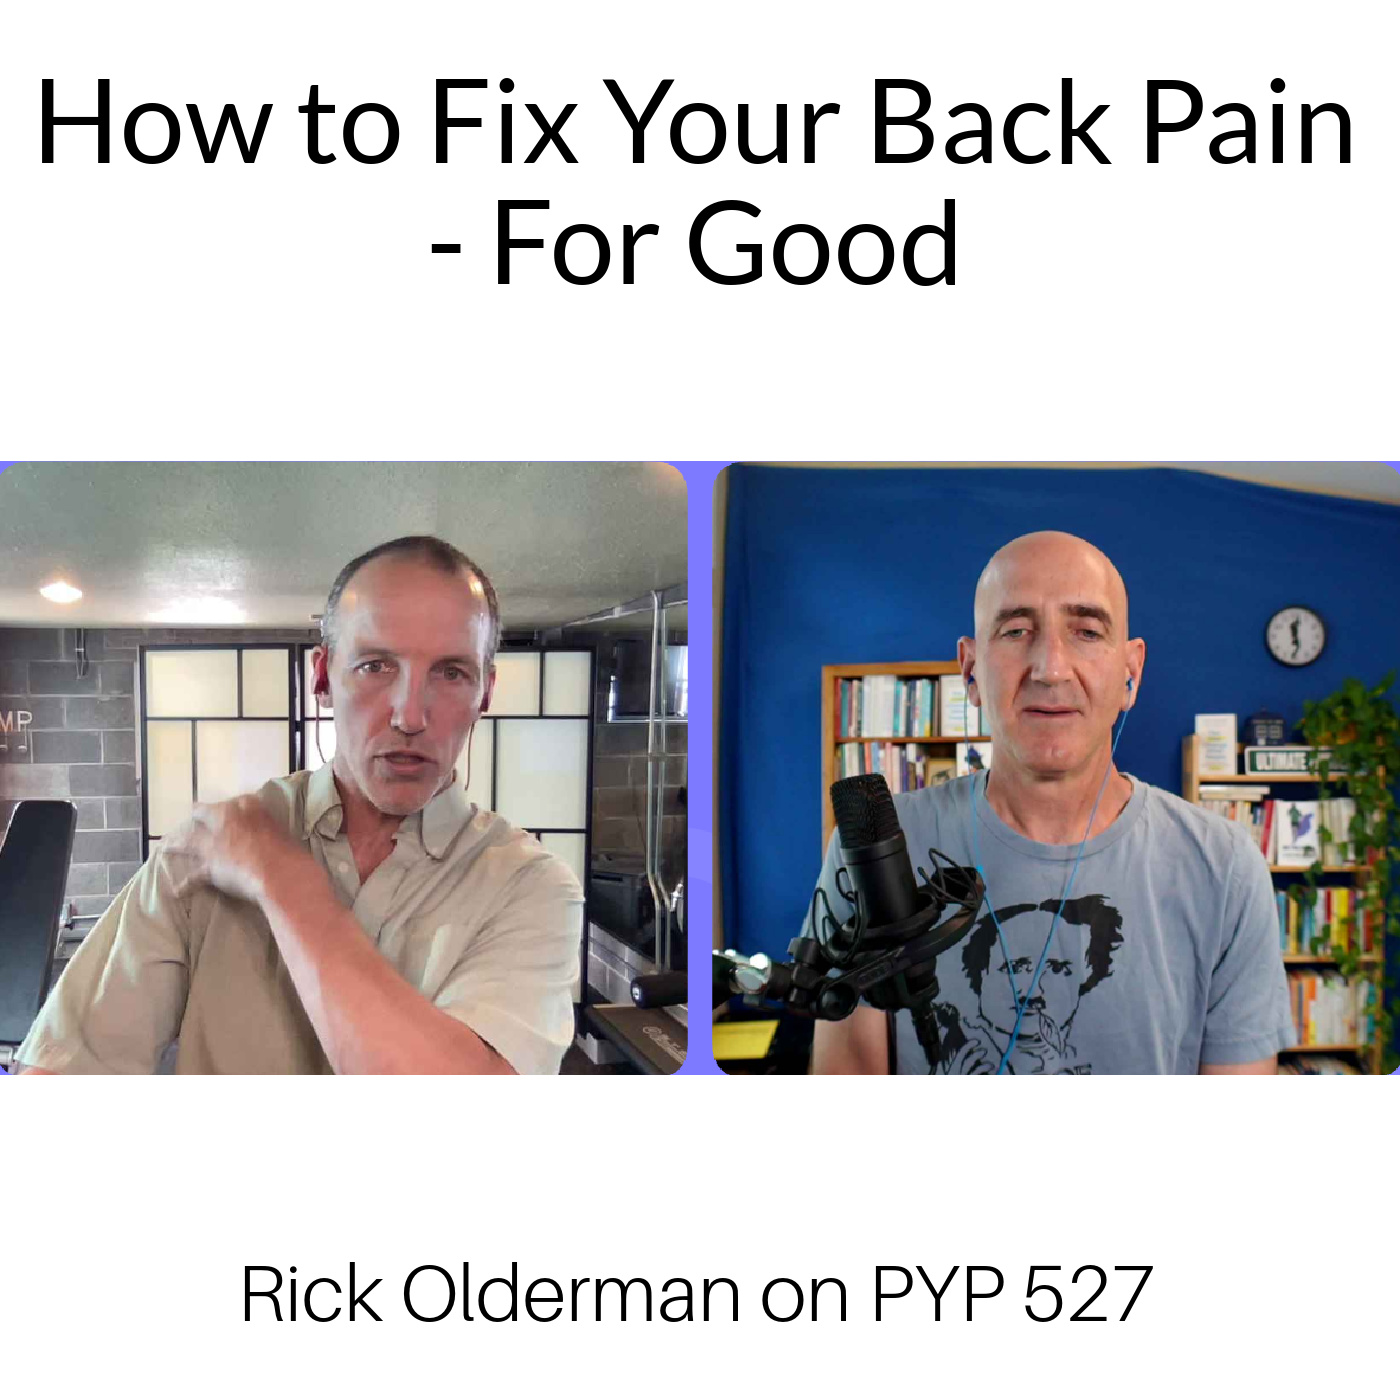 How to Fix Your Pain for Good: Rick Olderman on PYP 527